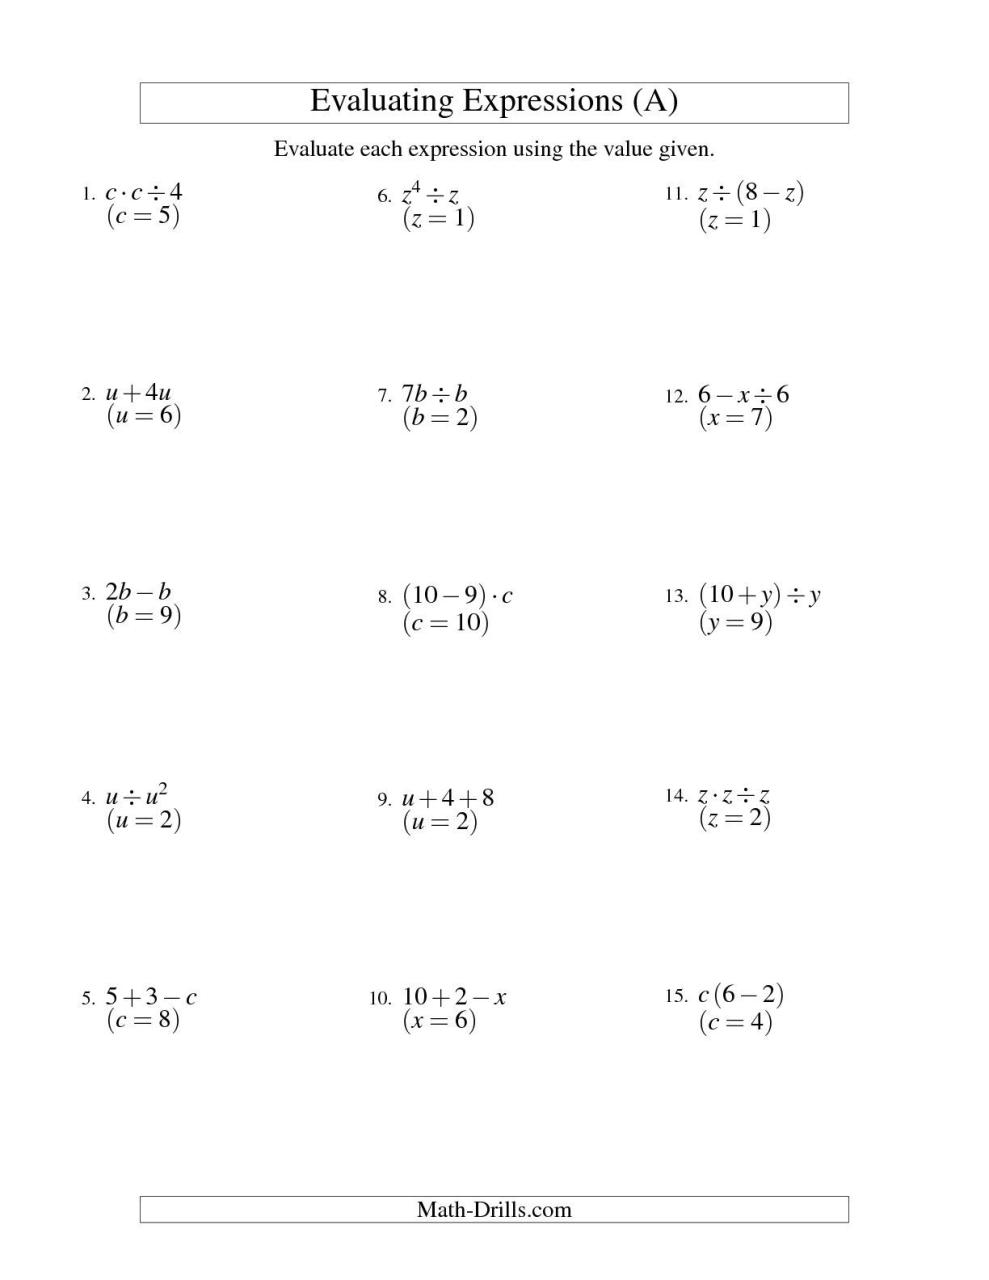 The Evaluating TwoStep Algebraic Expressions with One Variable (A